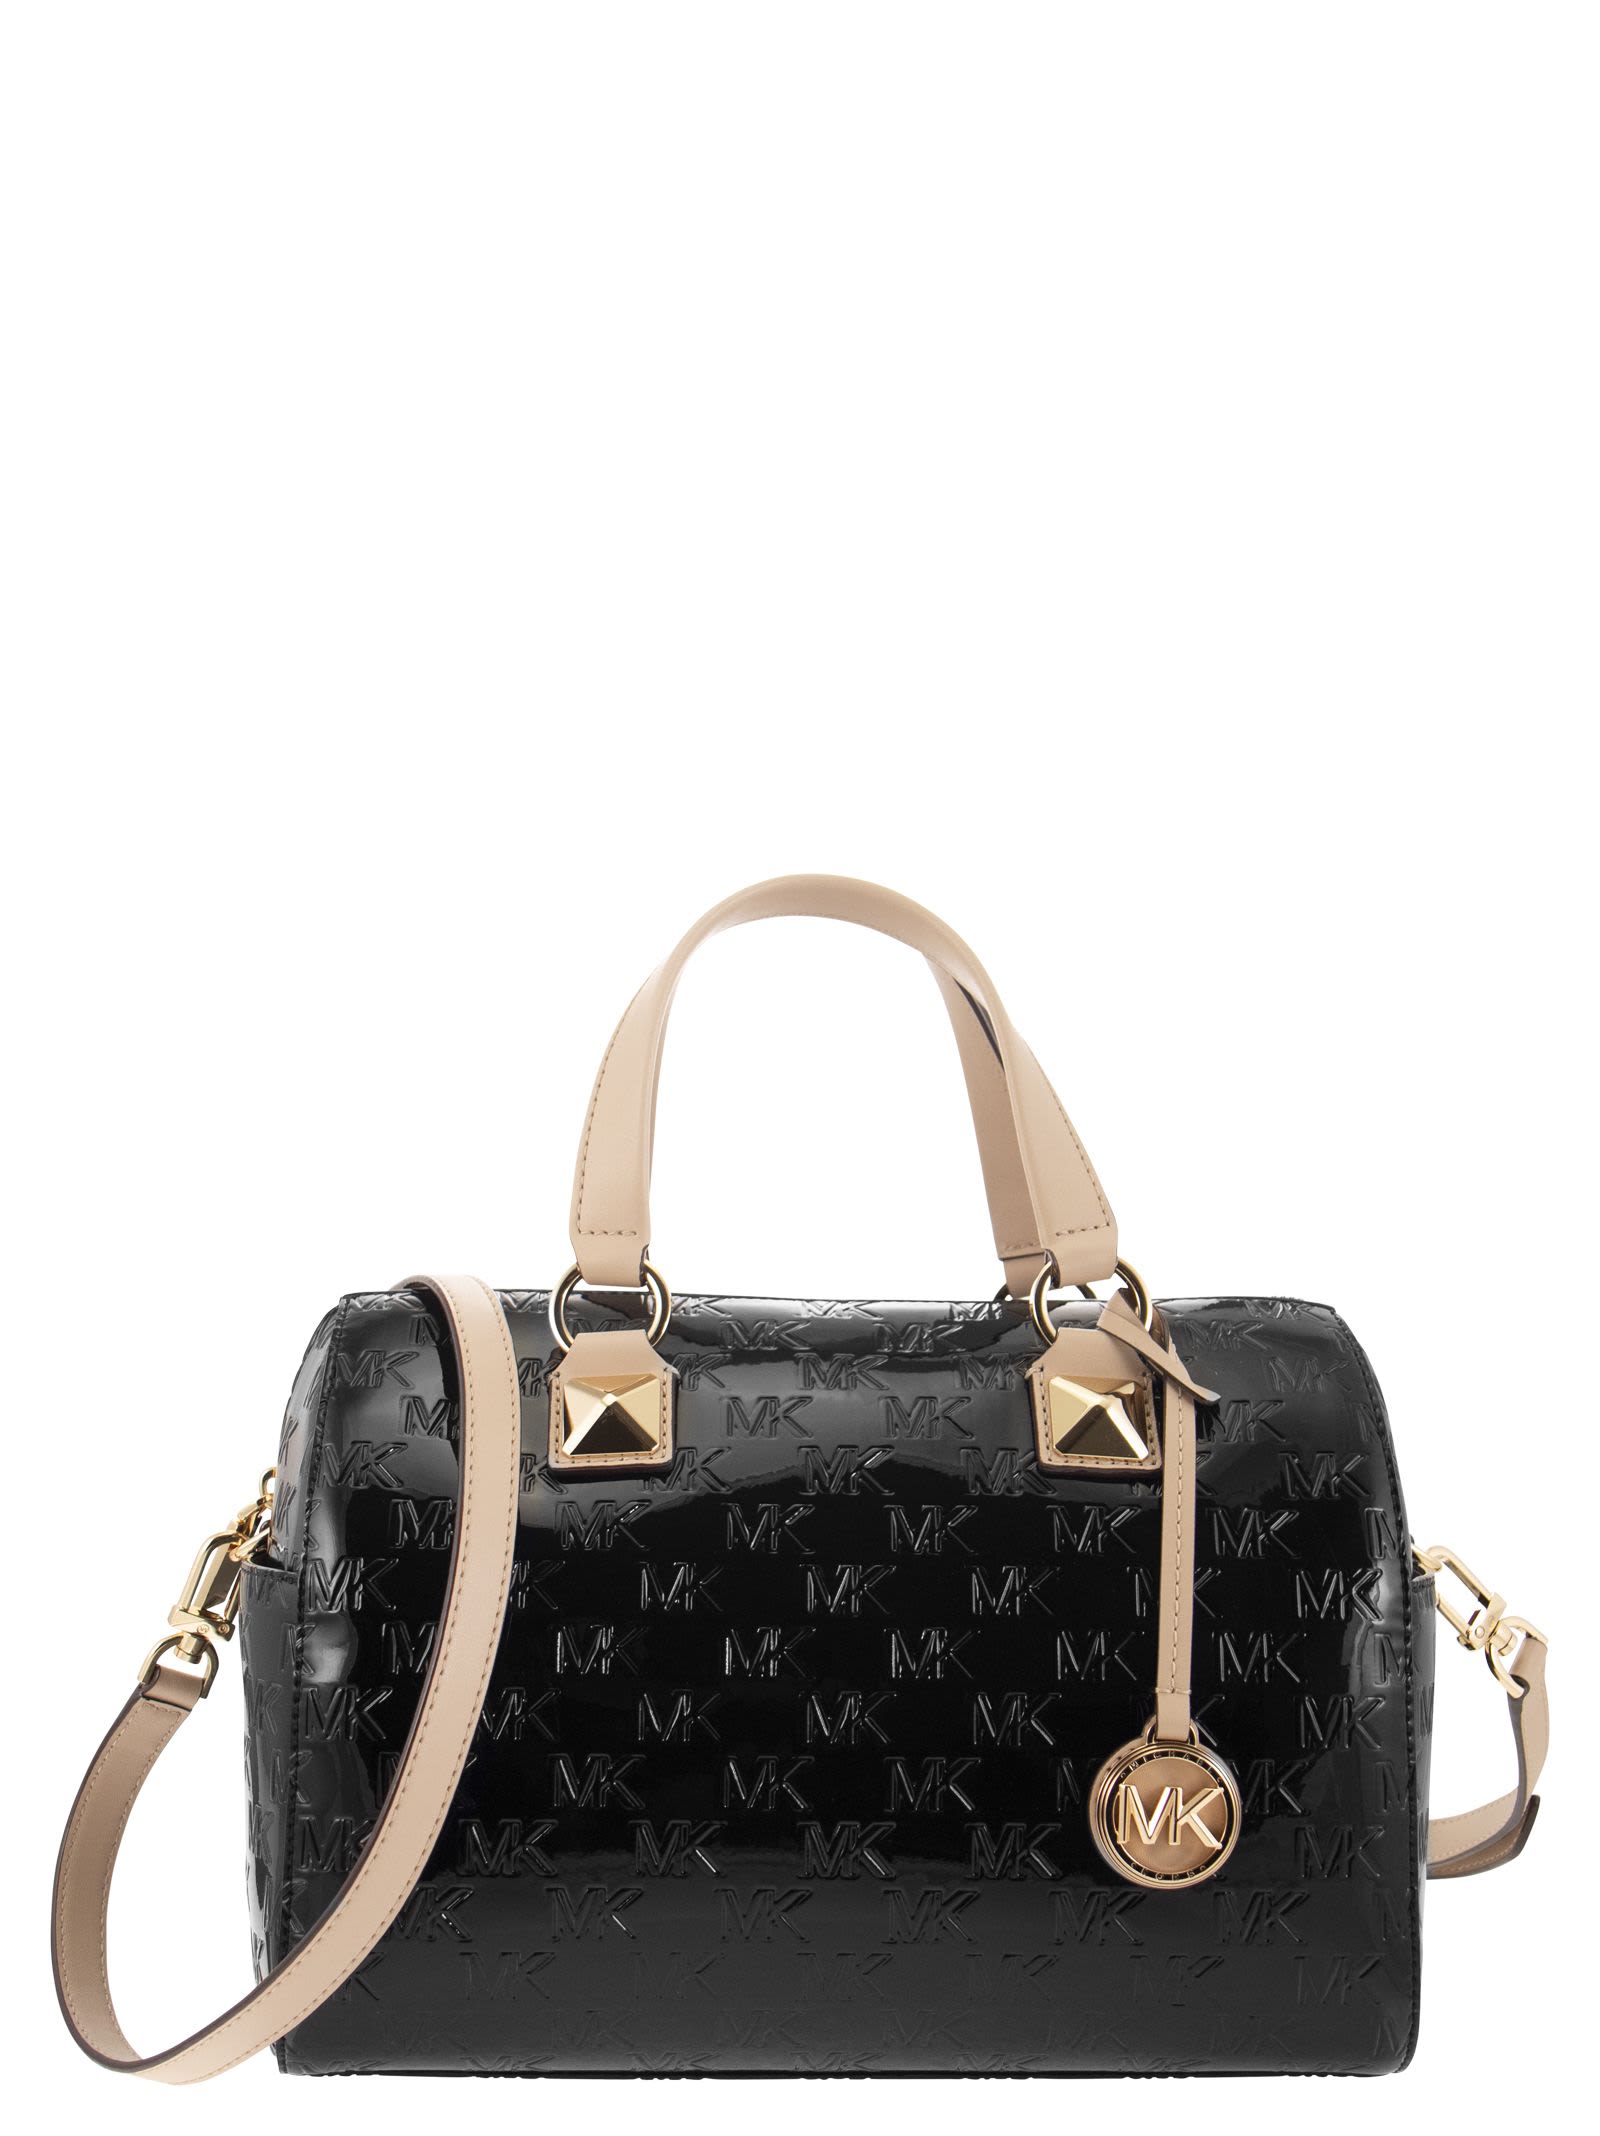 Michael Kors Hand Bag With Shoulder Strap And Monogram - Black - female - Size: 0one size